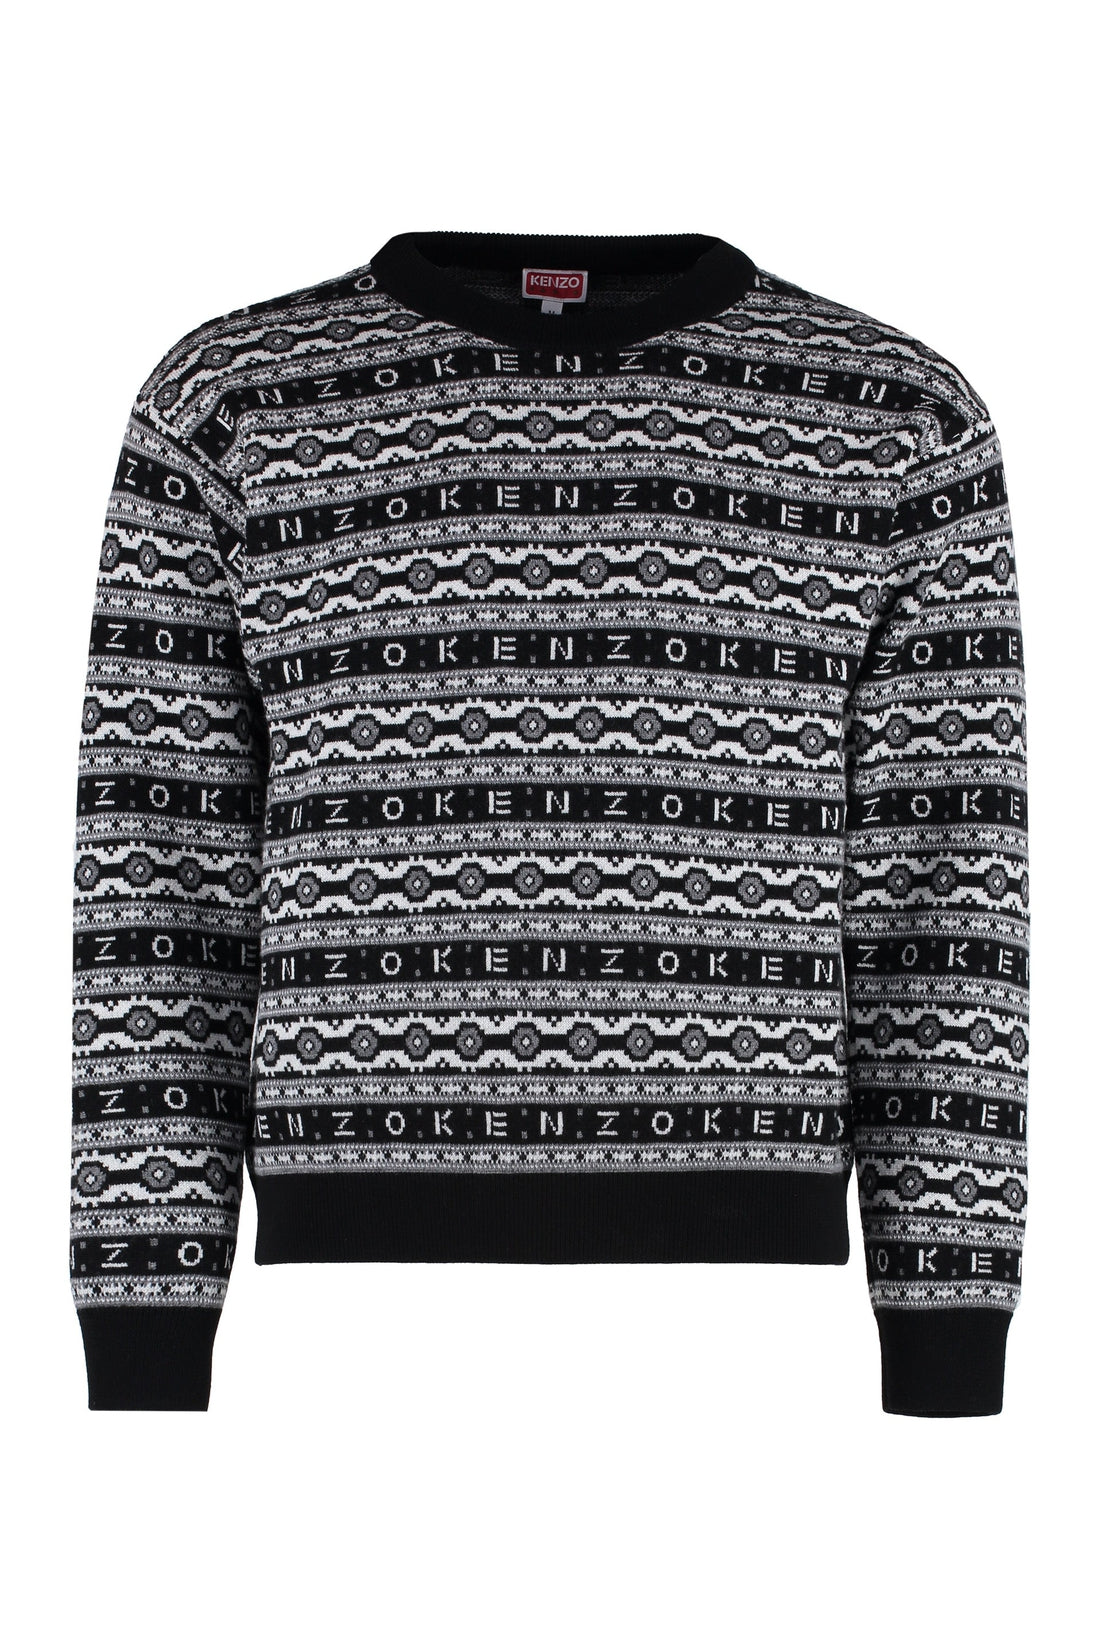 Kenzo-OUTLET-SALE-Jacquard wool sweater-ARCHIVIST